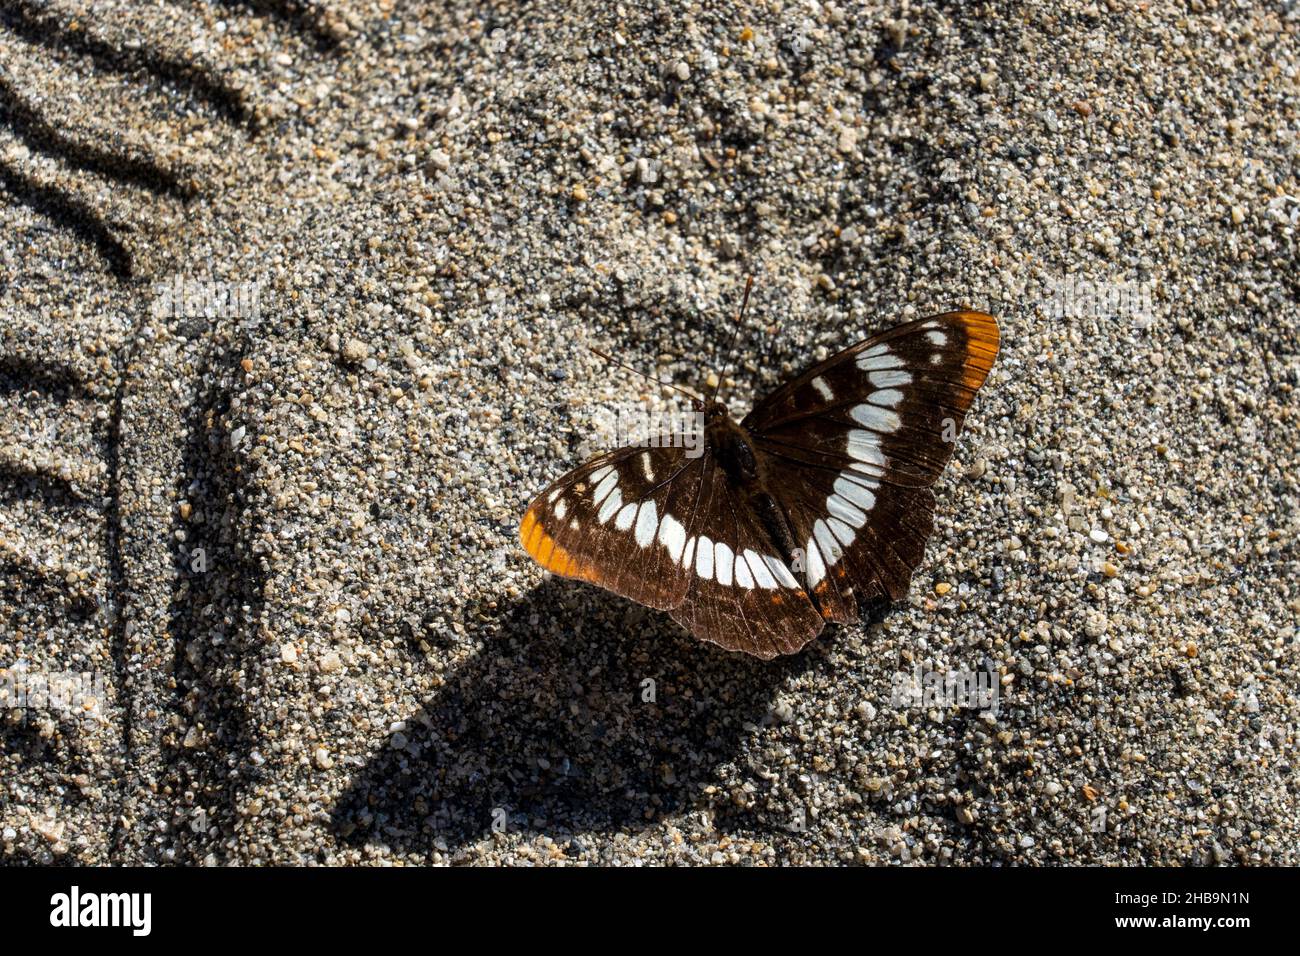 Leavenworth, Washington, USA.  Dorsal view of a Lorquin's Admiral (Limenitis lorquini) butterfly on a sandy beach beside the Wenatchee River. Stock Photo